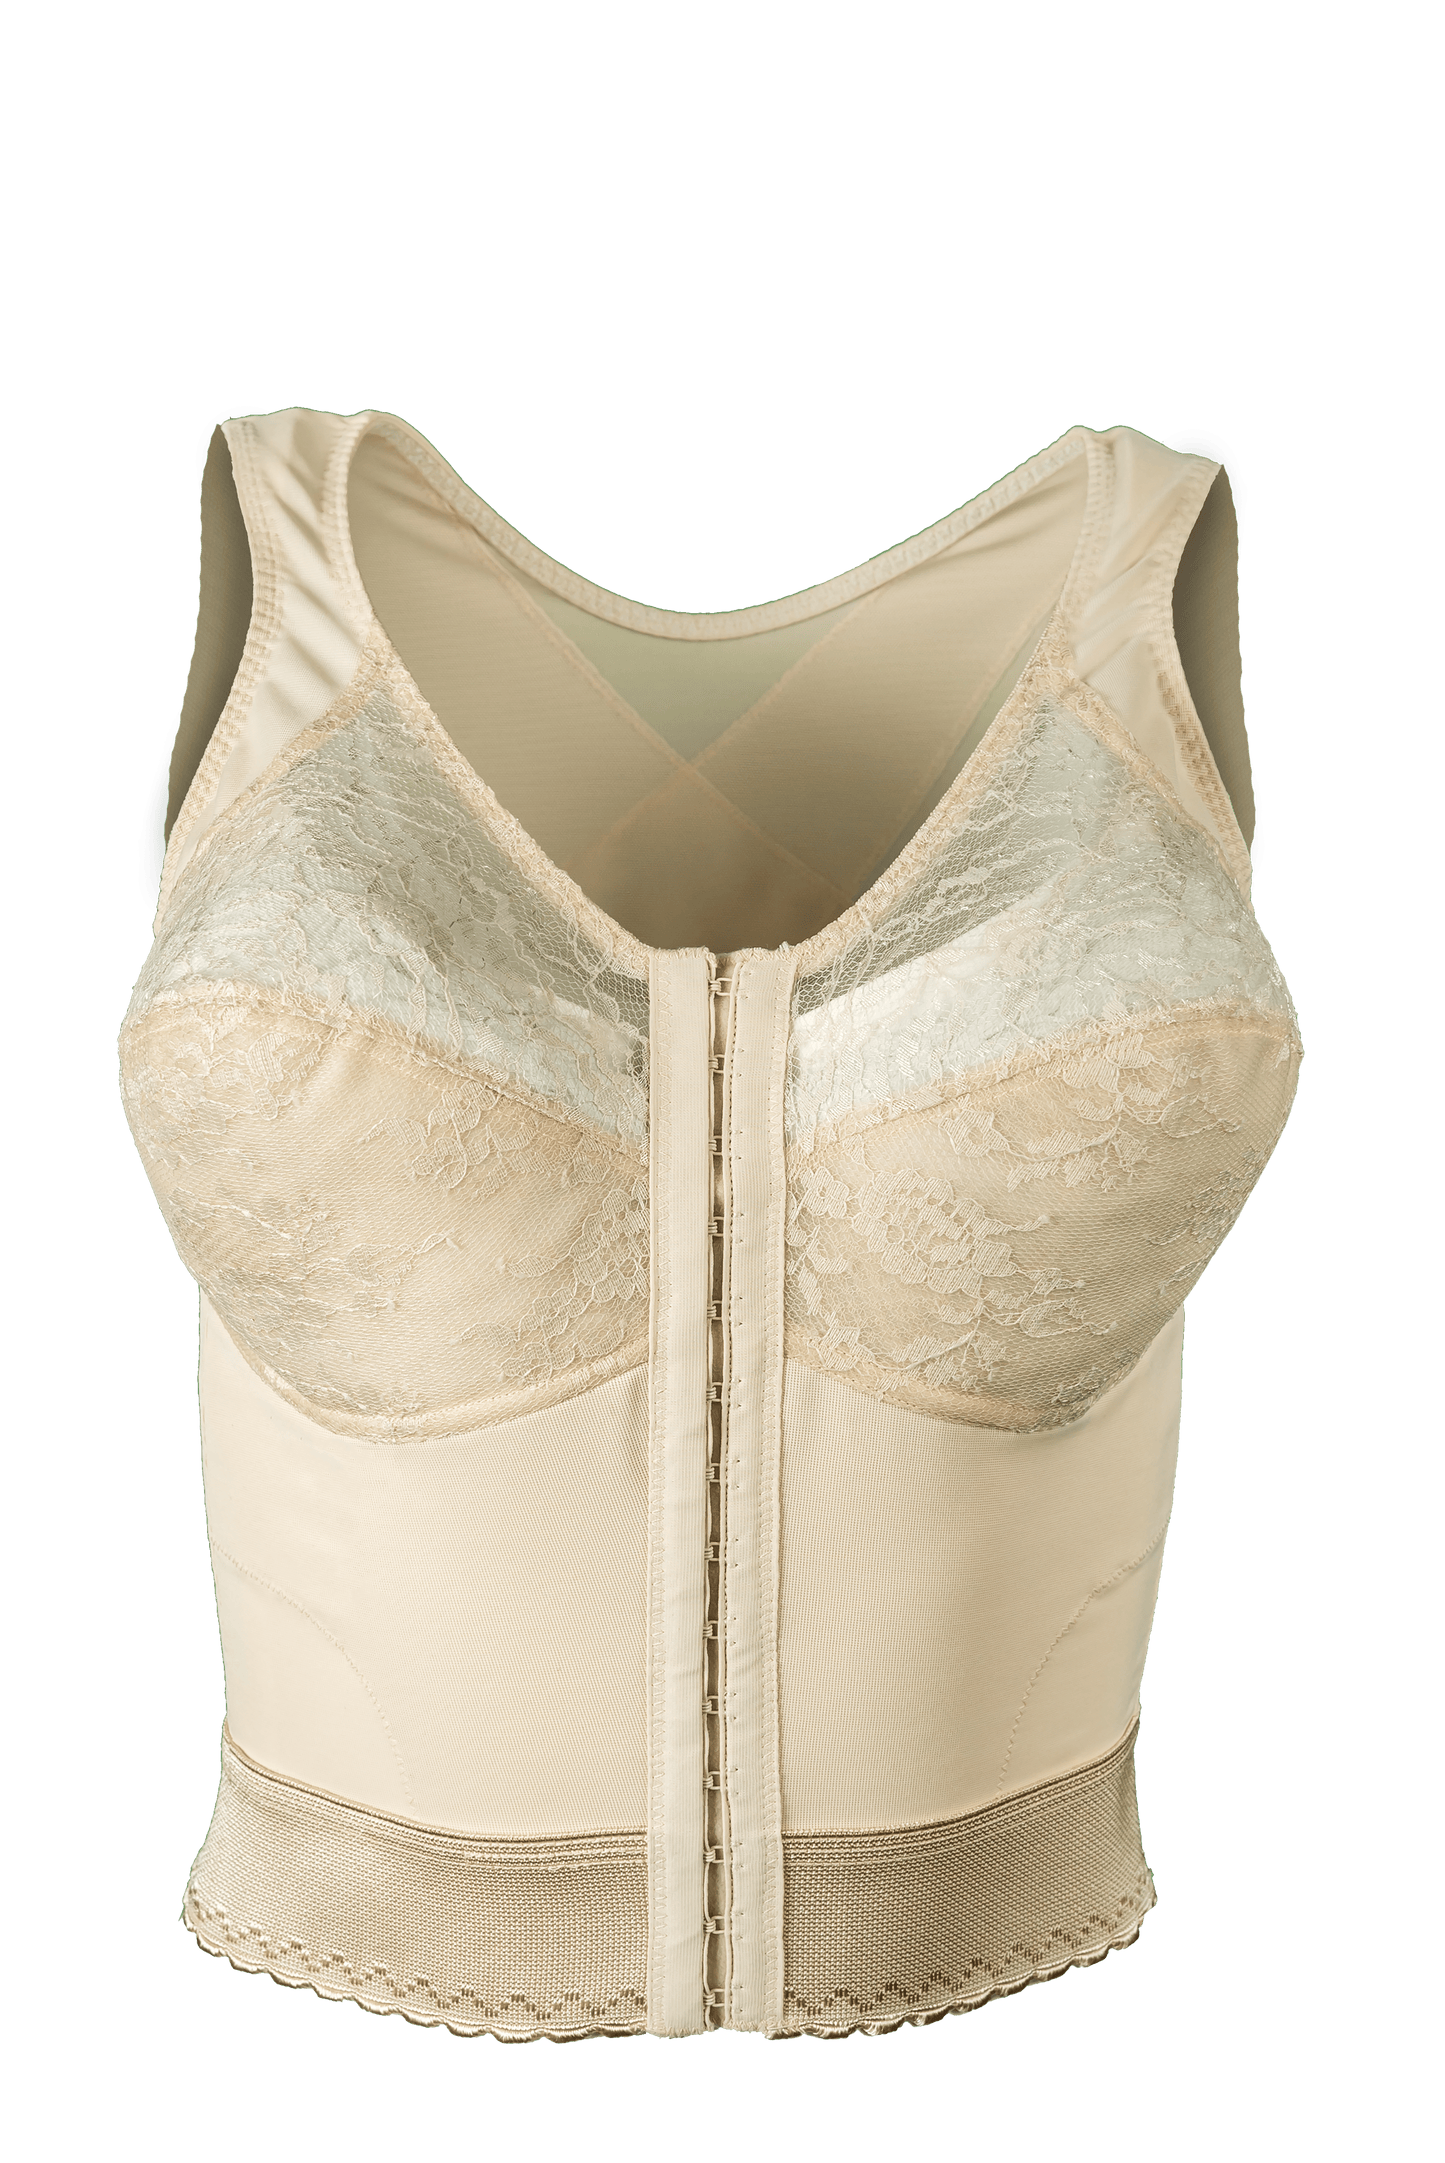 Front Closure Longline Bra with Back Support